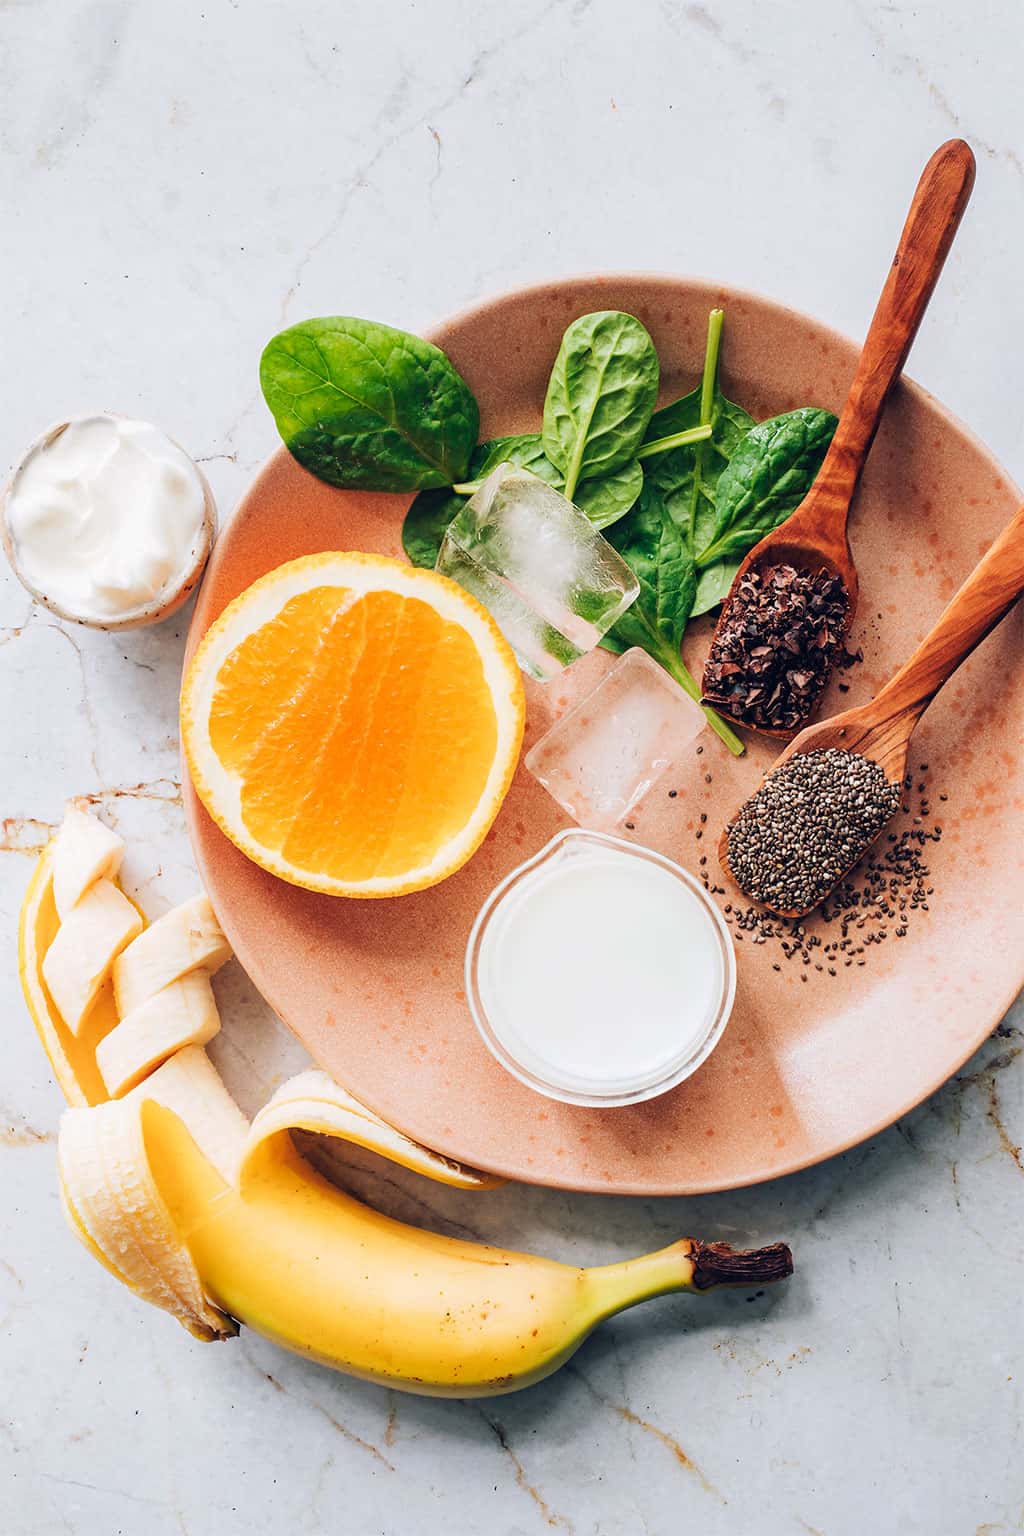 Ingredients for a superfood smoothie recipe for PMS symptoms